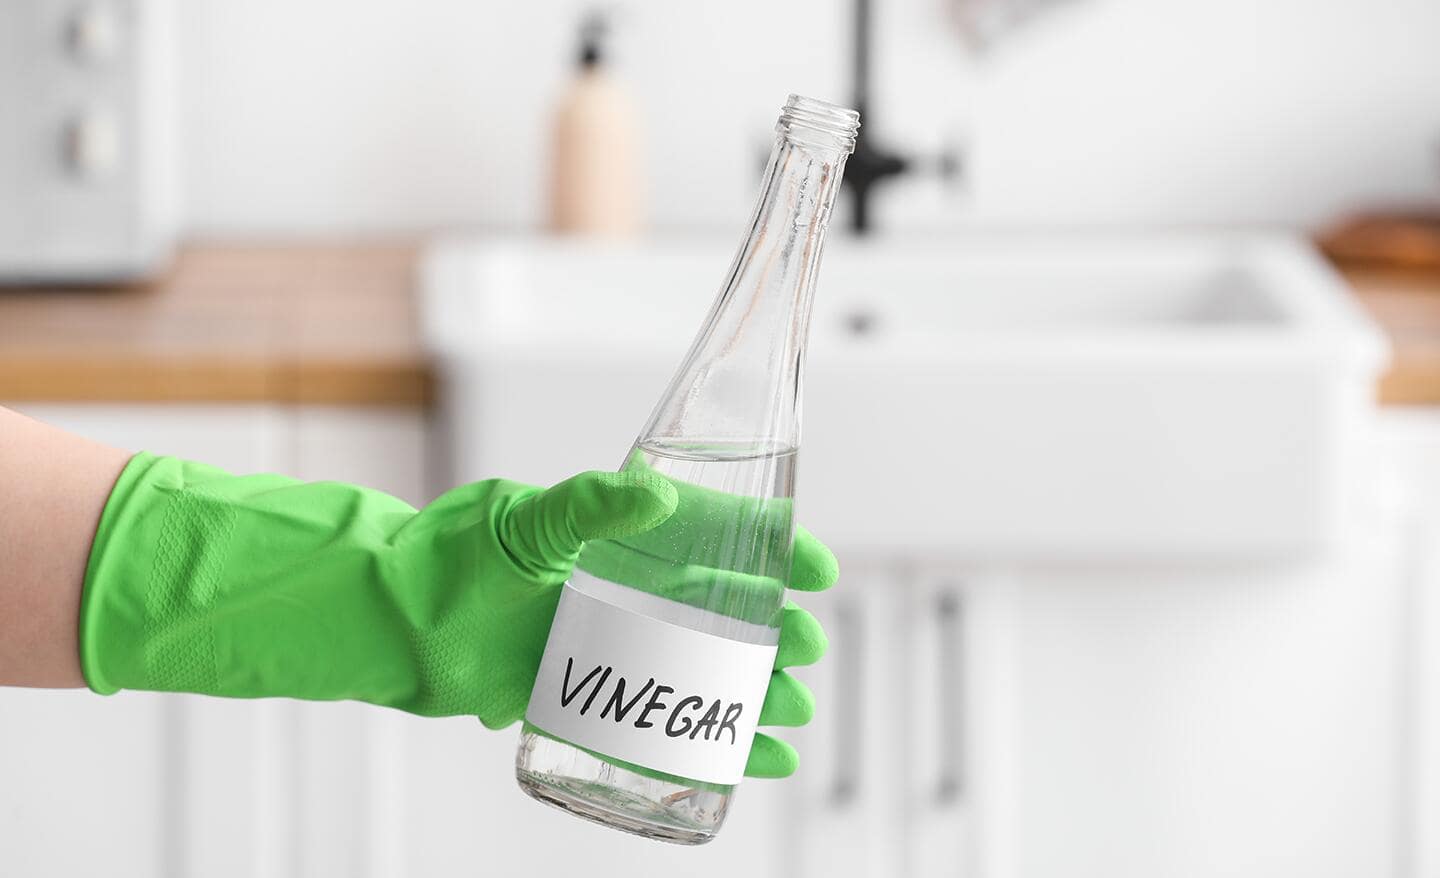 Someone wearing cleaning gloves and holding a glass bottle of vinegar.